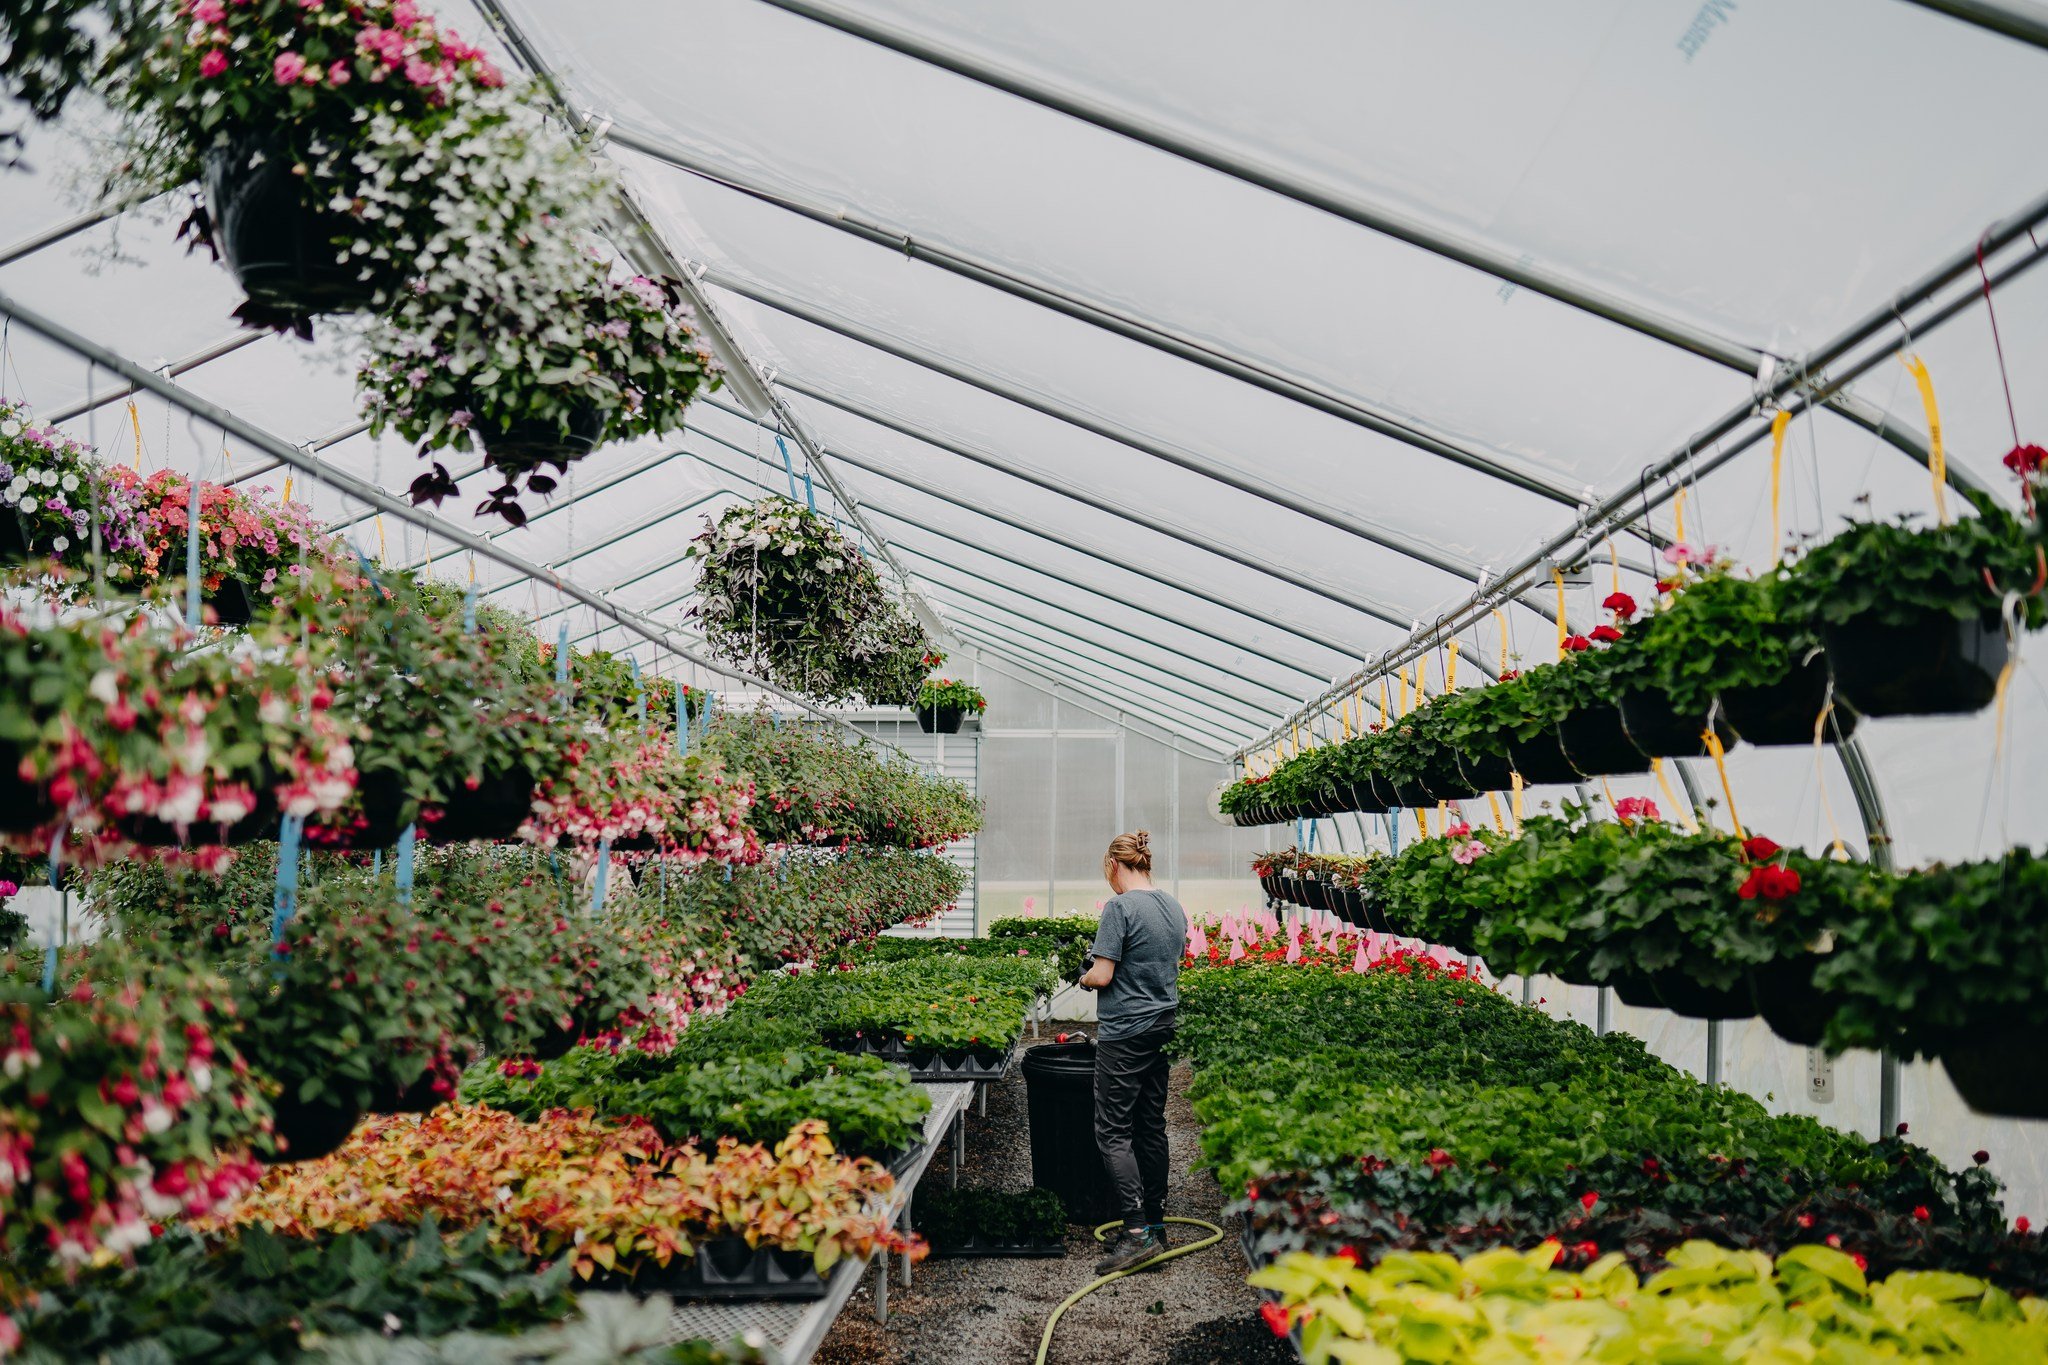 With greenhouses full of beauty, we are excited to share what we have grown! 🌼🌻🌷

Whether you live closer to our Cadott campus or just want to explore our growing farm, we invite you to stop on out! 

Cadott Growing Farm Hours:
Sun-Tues: CLOSED
We